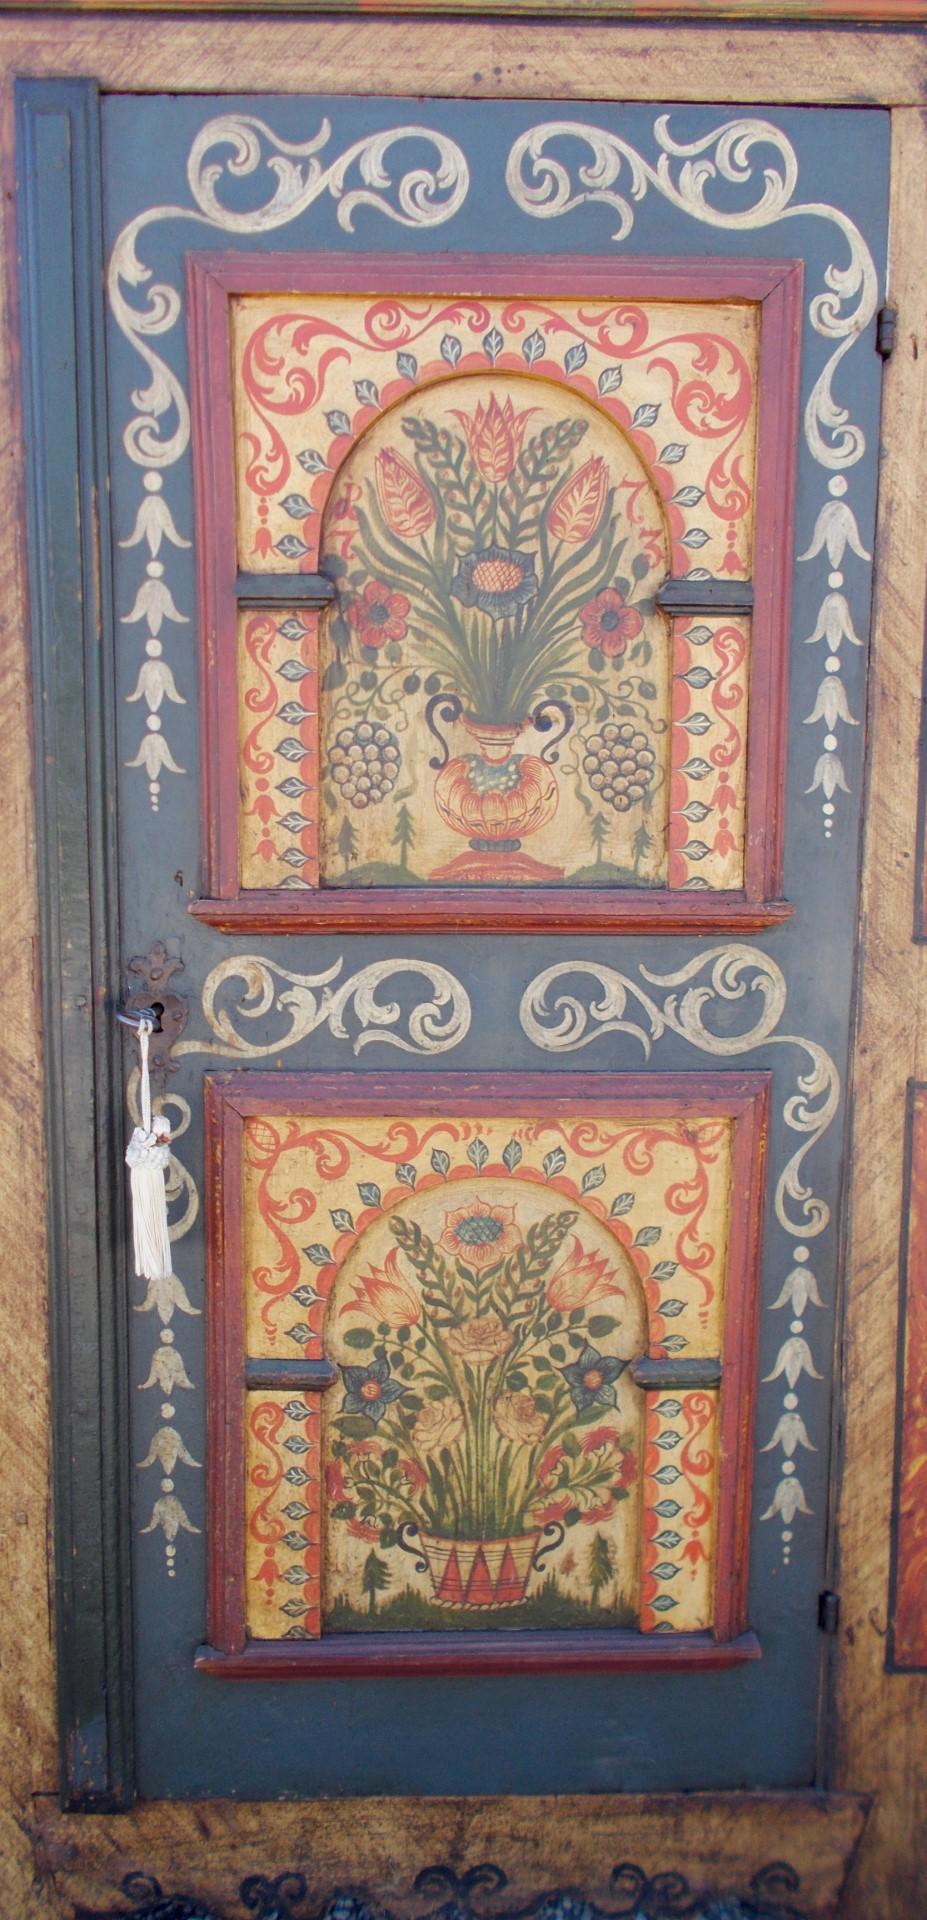 Hand-Painted Spruce cabinet decorated alpine peasant art style For Sale